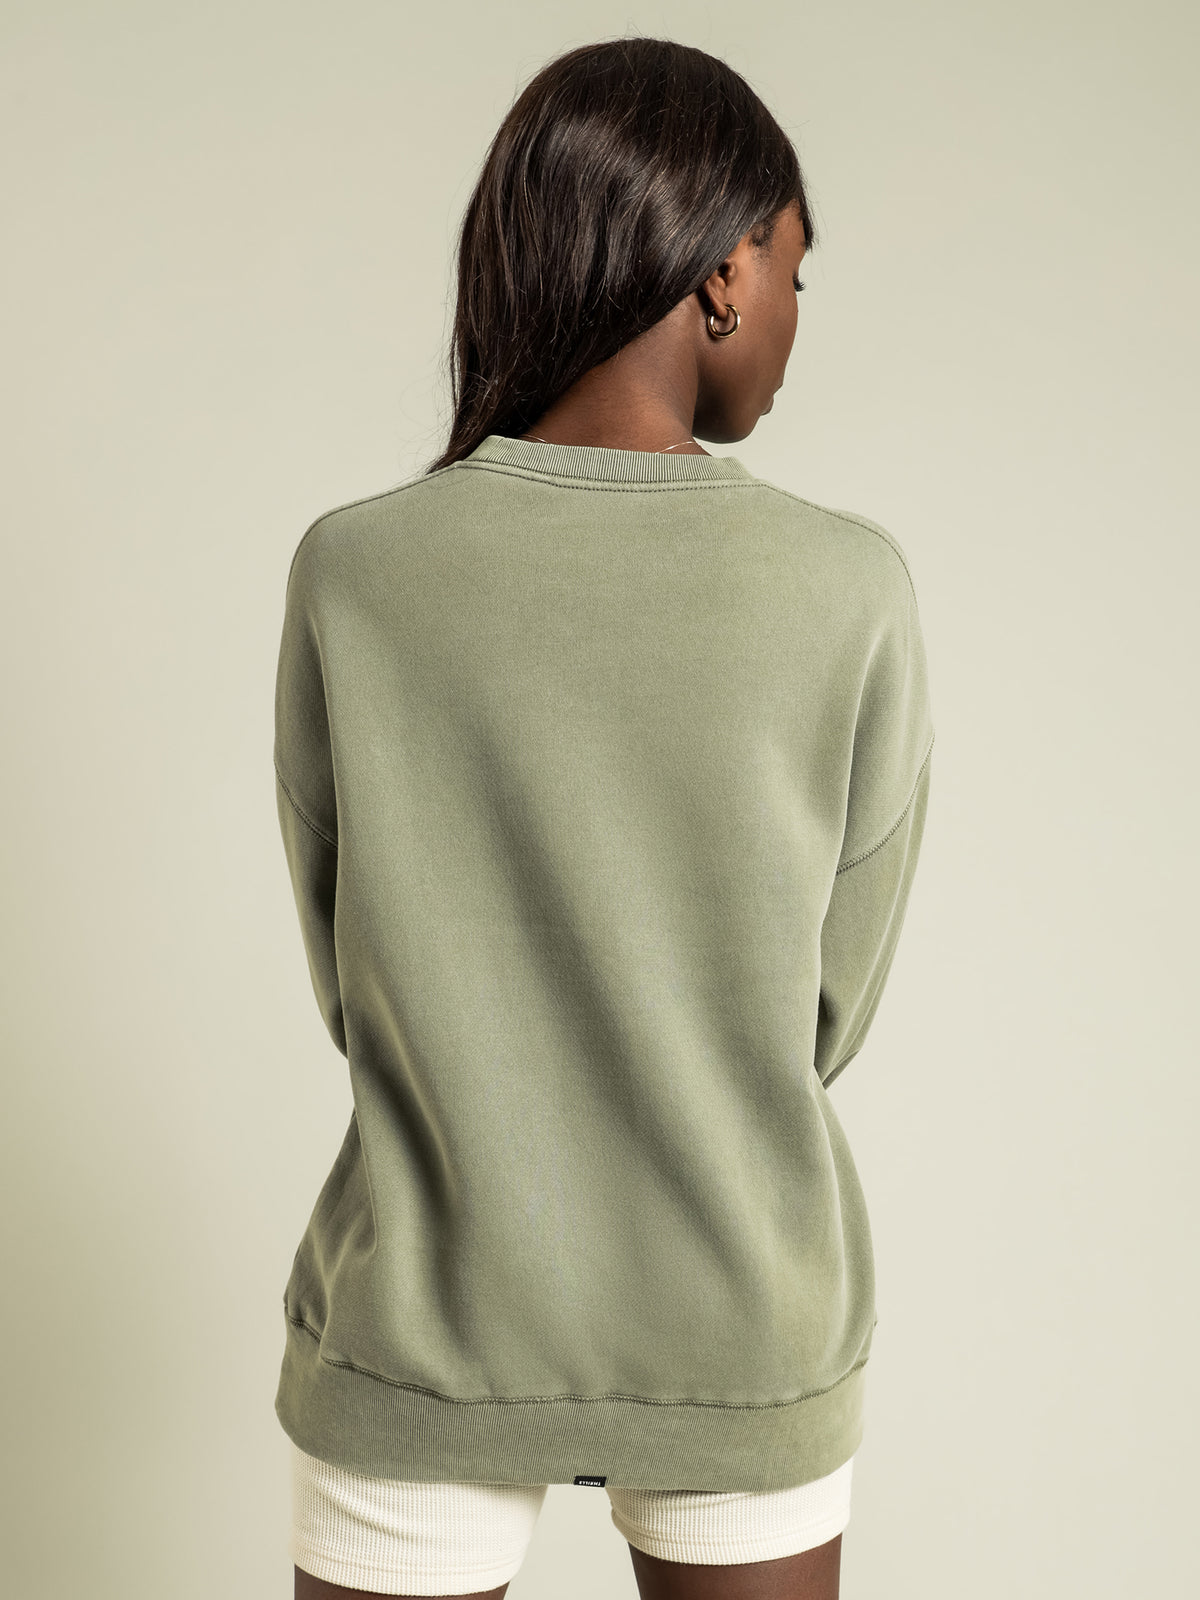 Enchantment Slouch Jumper in Army Green